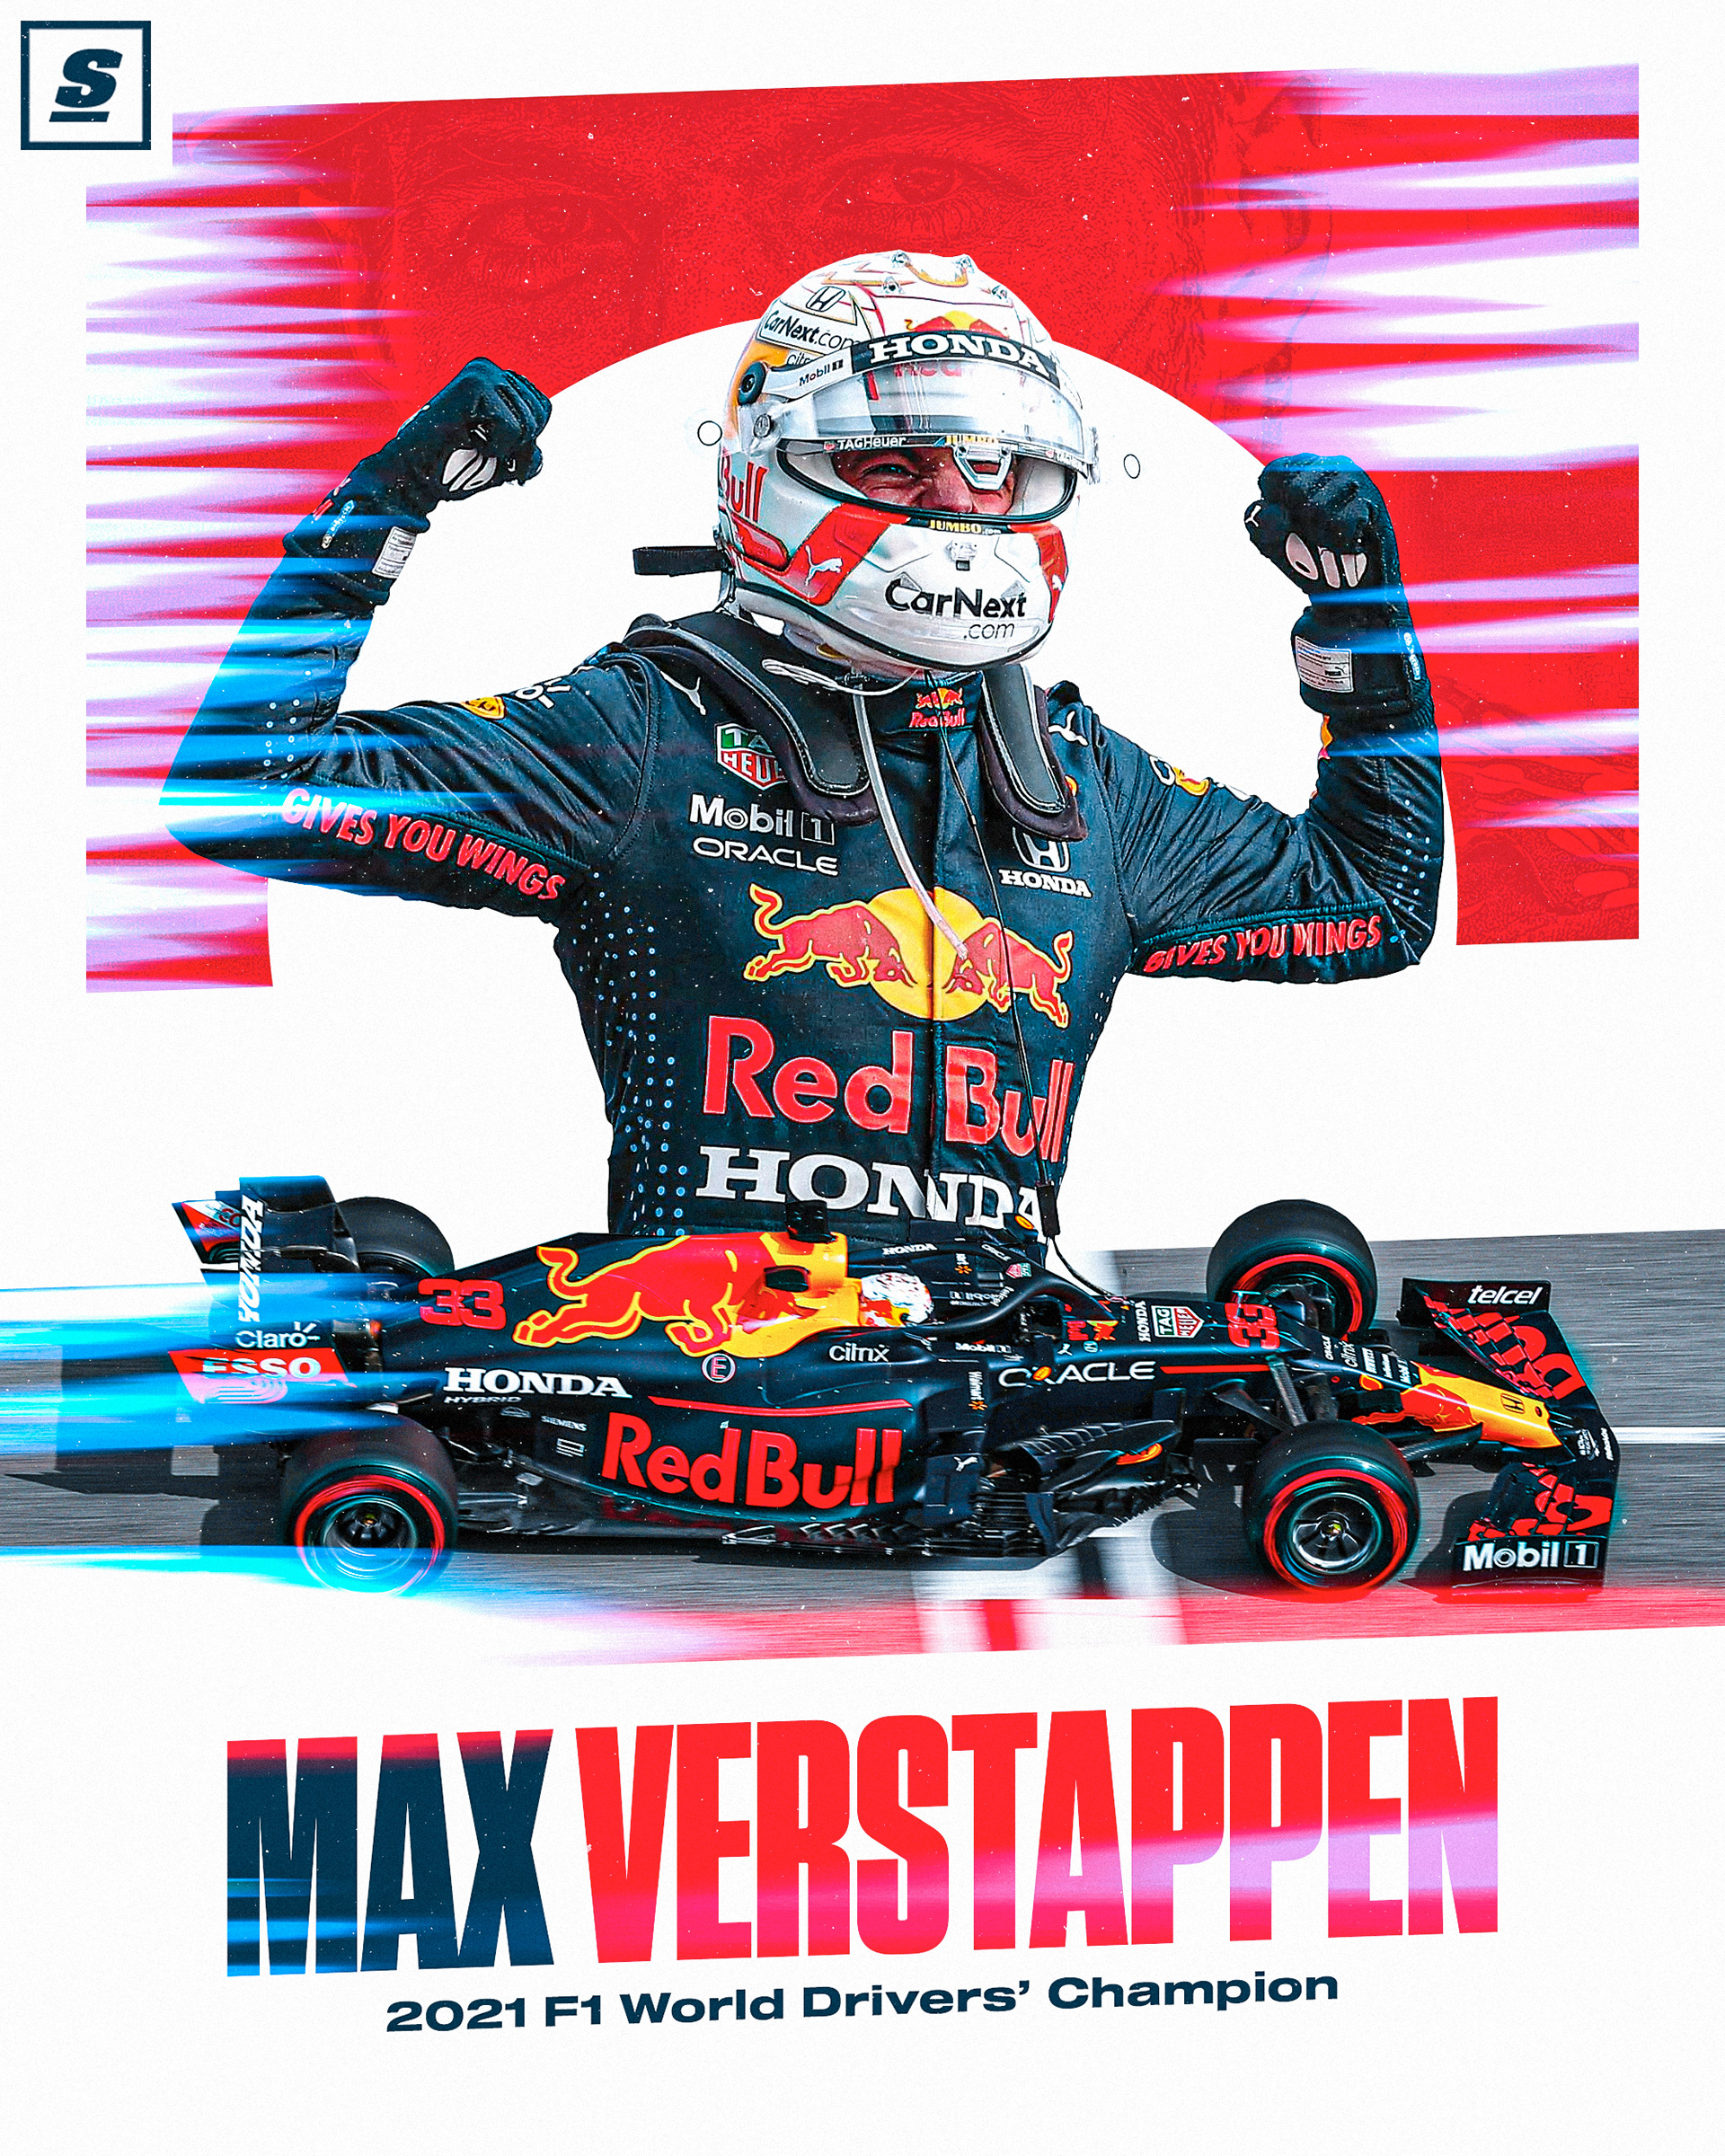 Max Verstappen takes home the title and is crowned 2021 World Drivers'  Champion